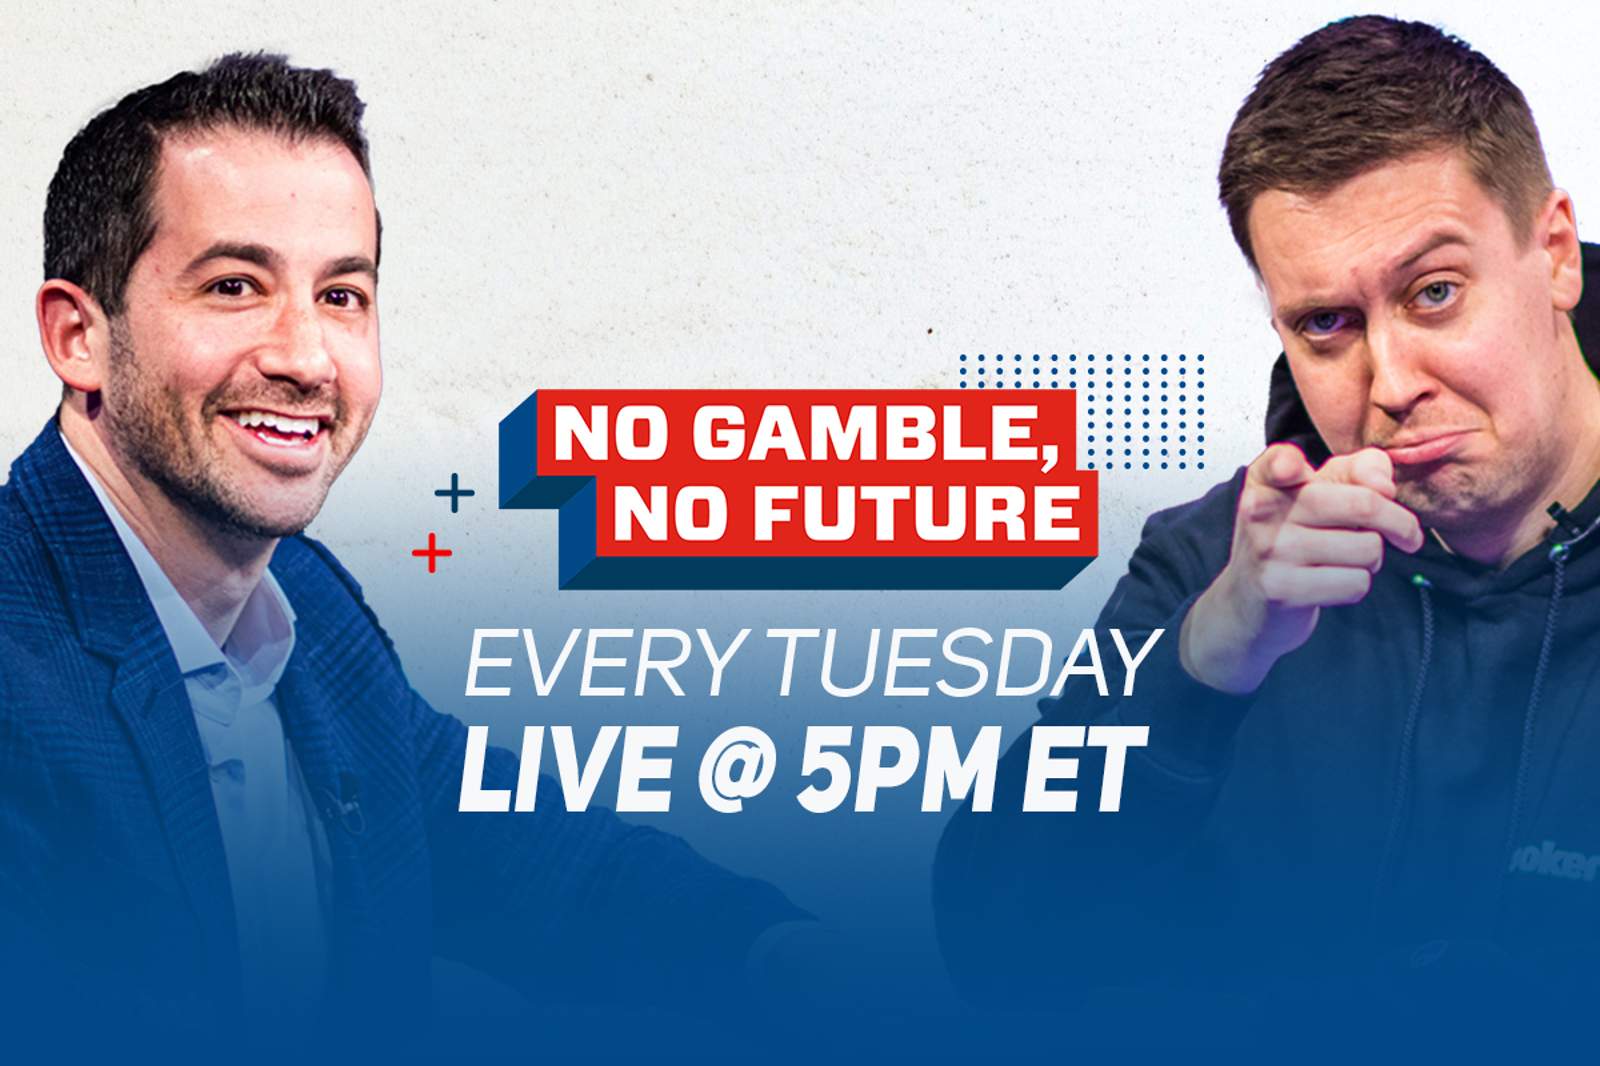 No Gamble, No Future Episode 7 on Today at 5 p.m. ET with Phil Hellmuth and Daniel Negreanu